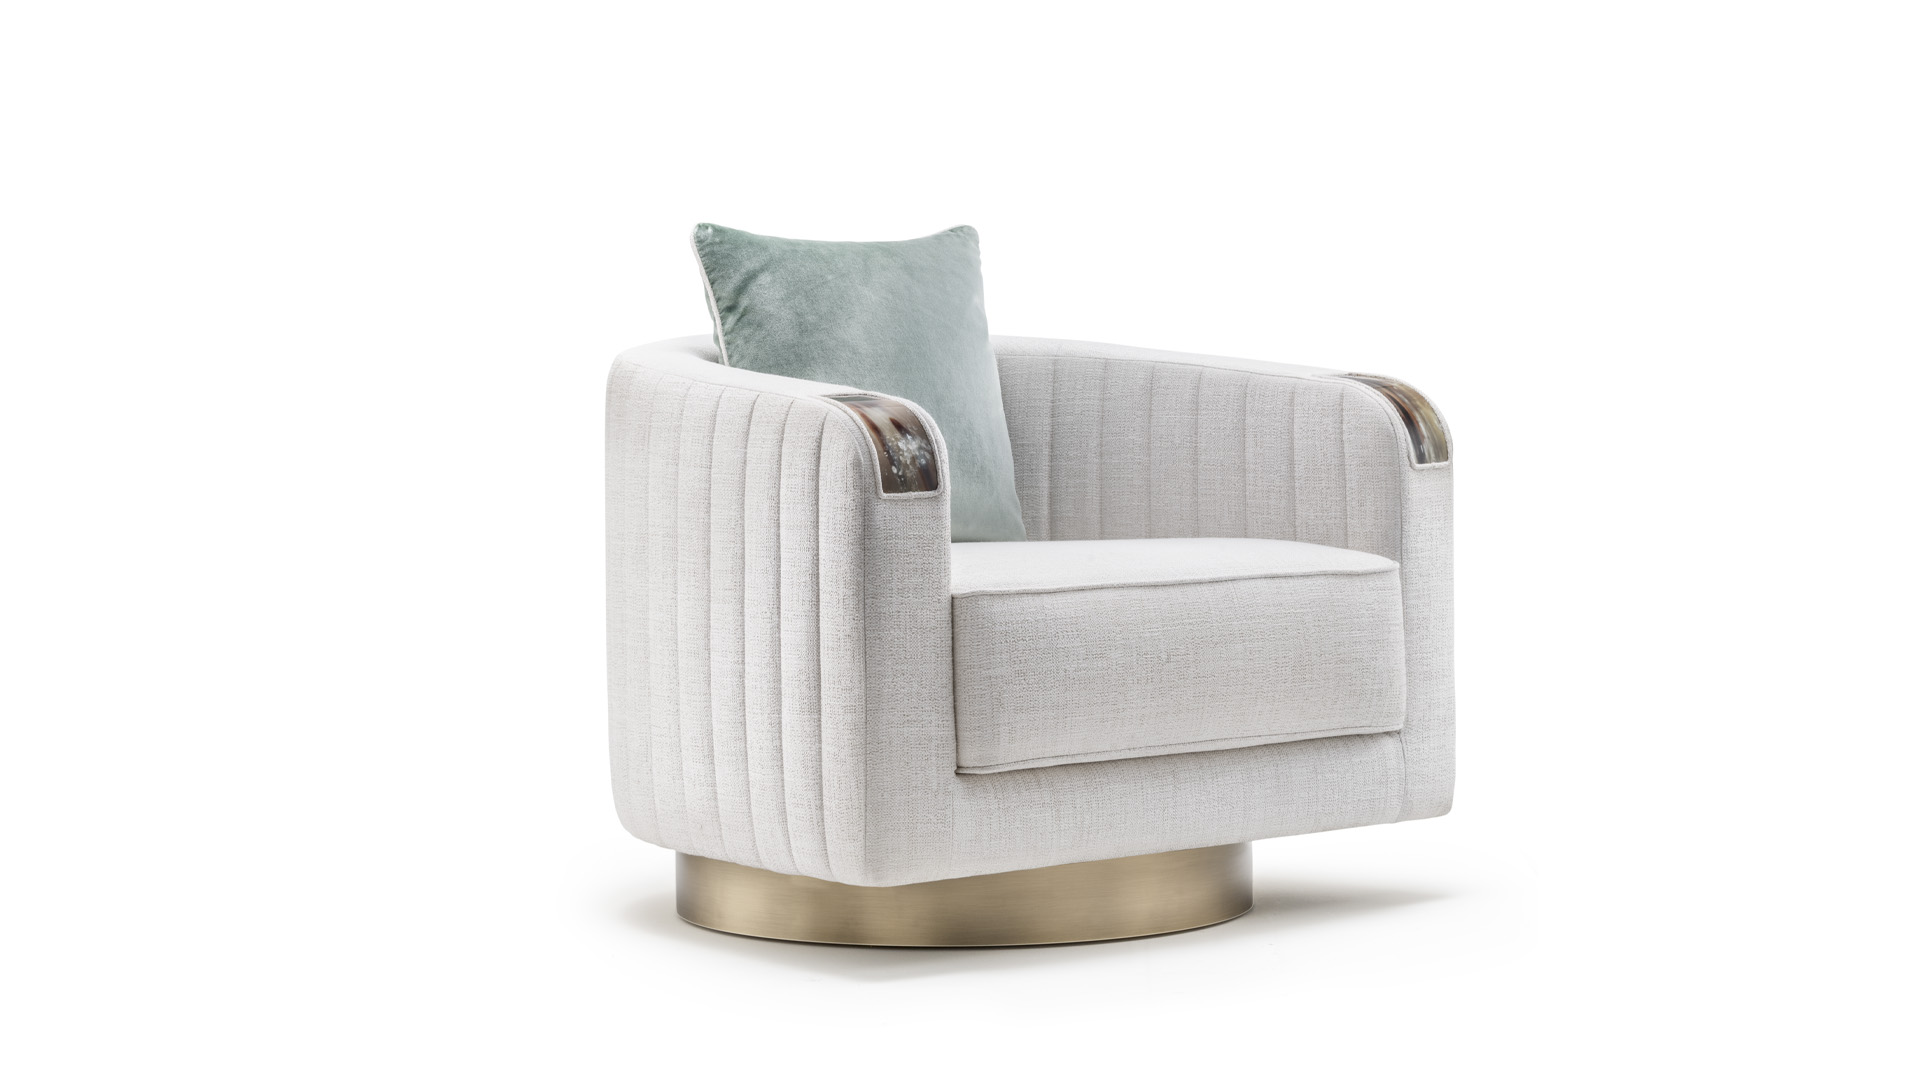 Sofas and seats - Rea armchair with horn armrests - cover - Arcahorn